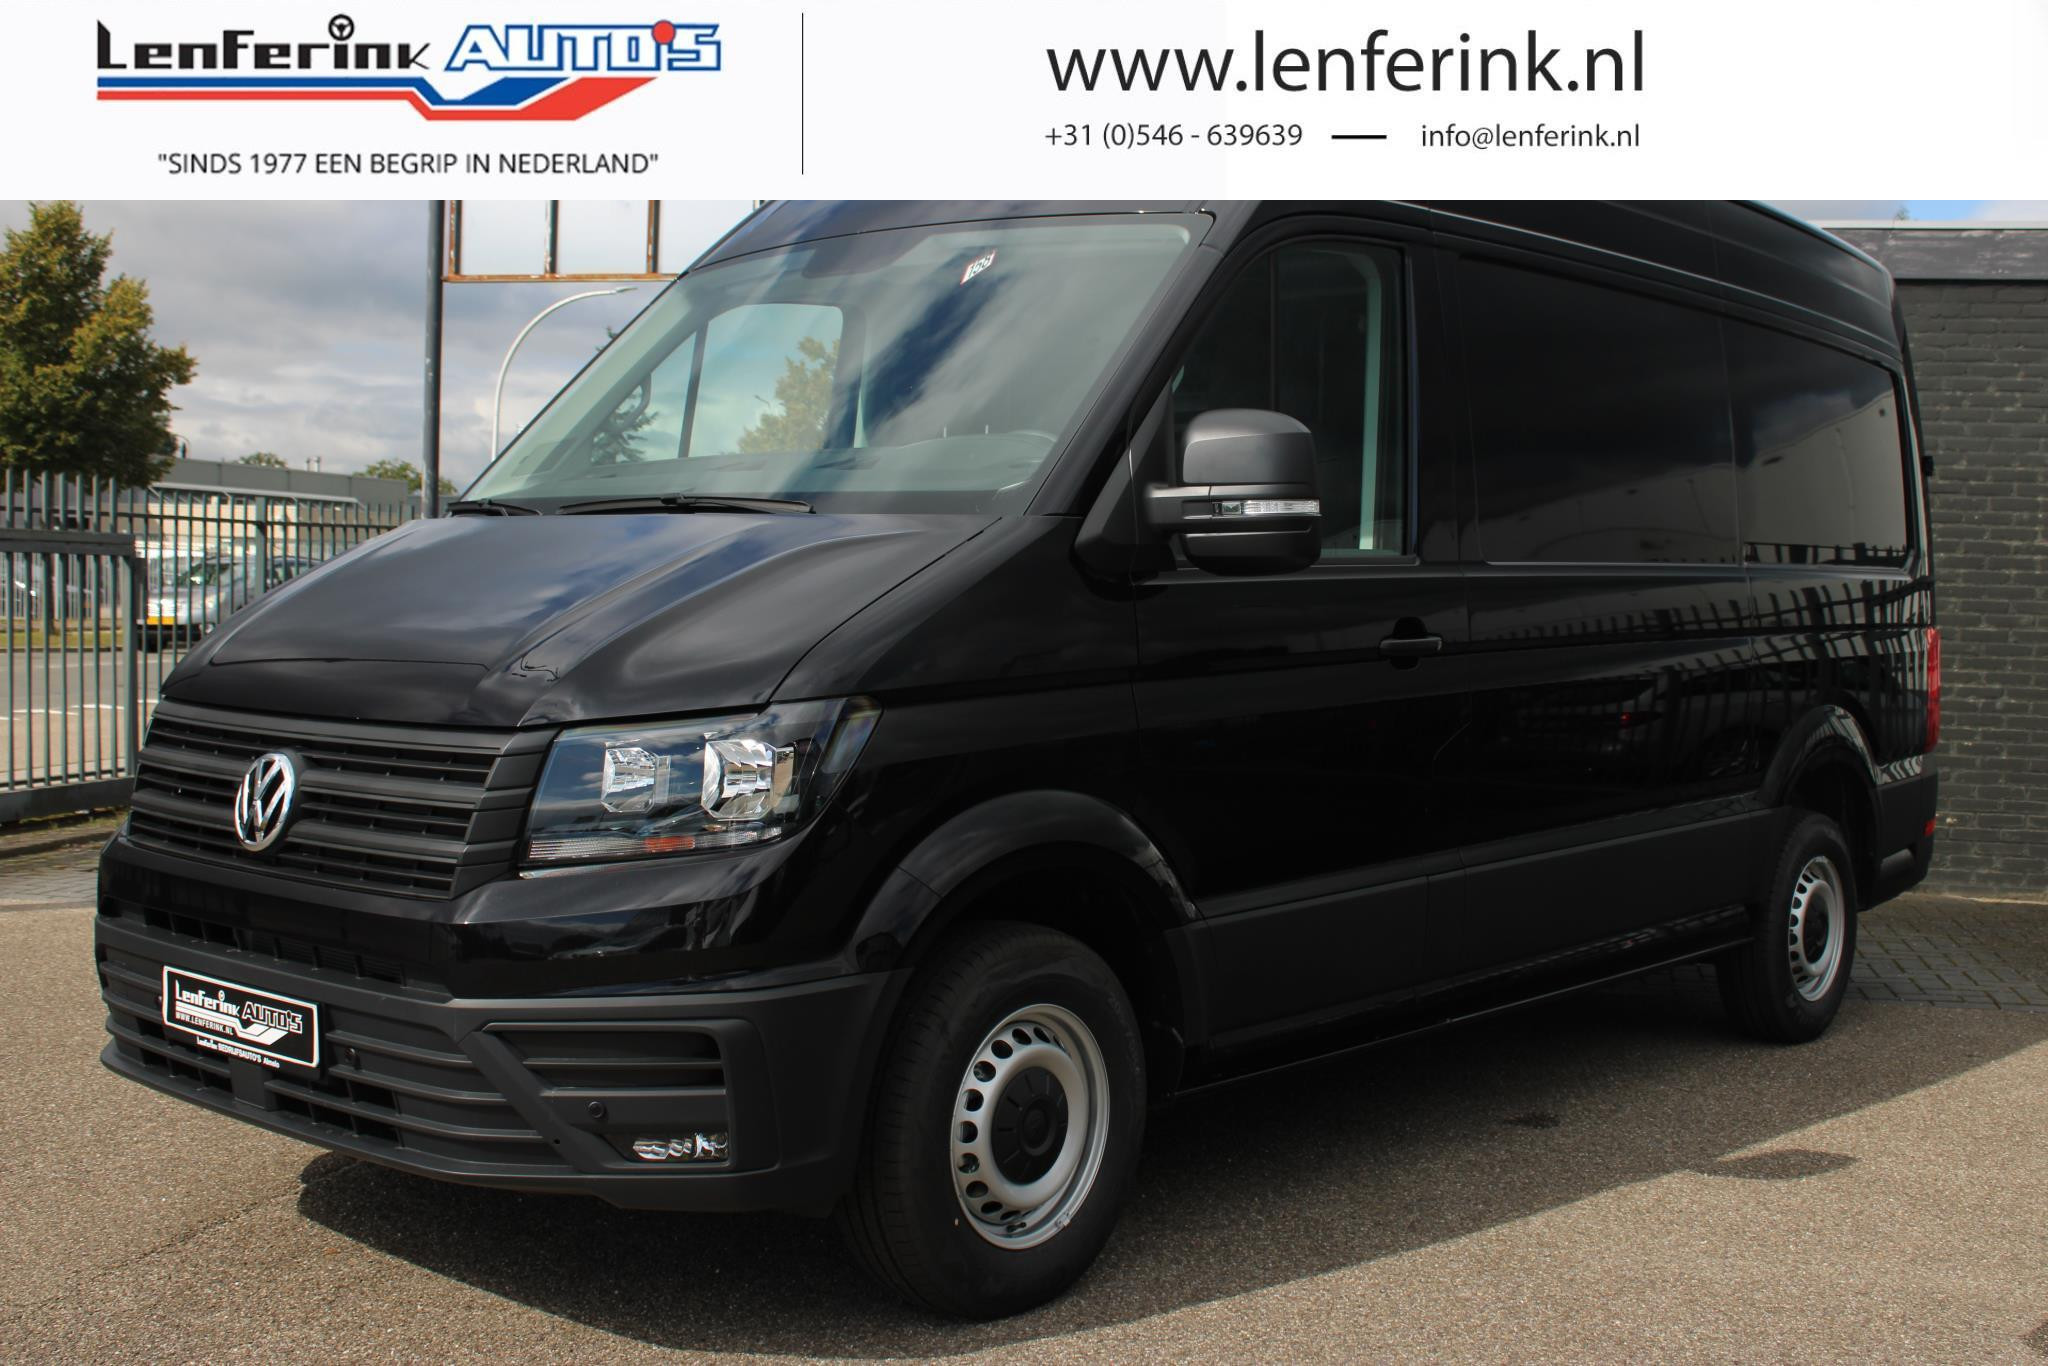 Volkswagen Crafter 2.0 TDI 140 pk L3H3 H6 Navi, Camera, Nieuw Airco, Cruise control, PDC V+A, App Connect, 3-Zits